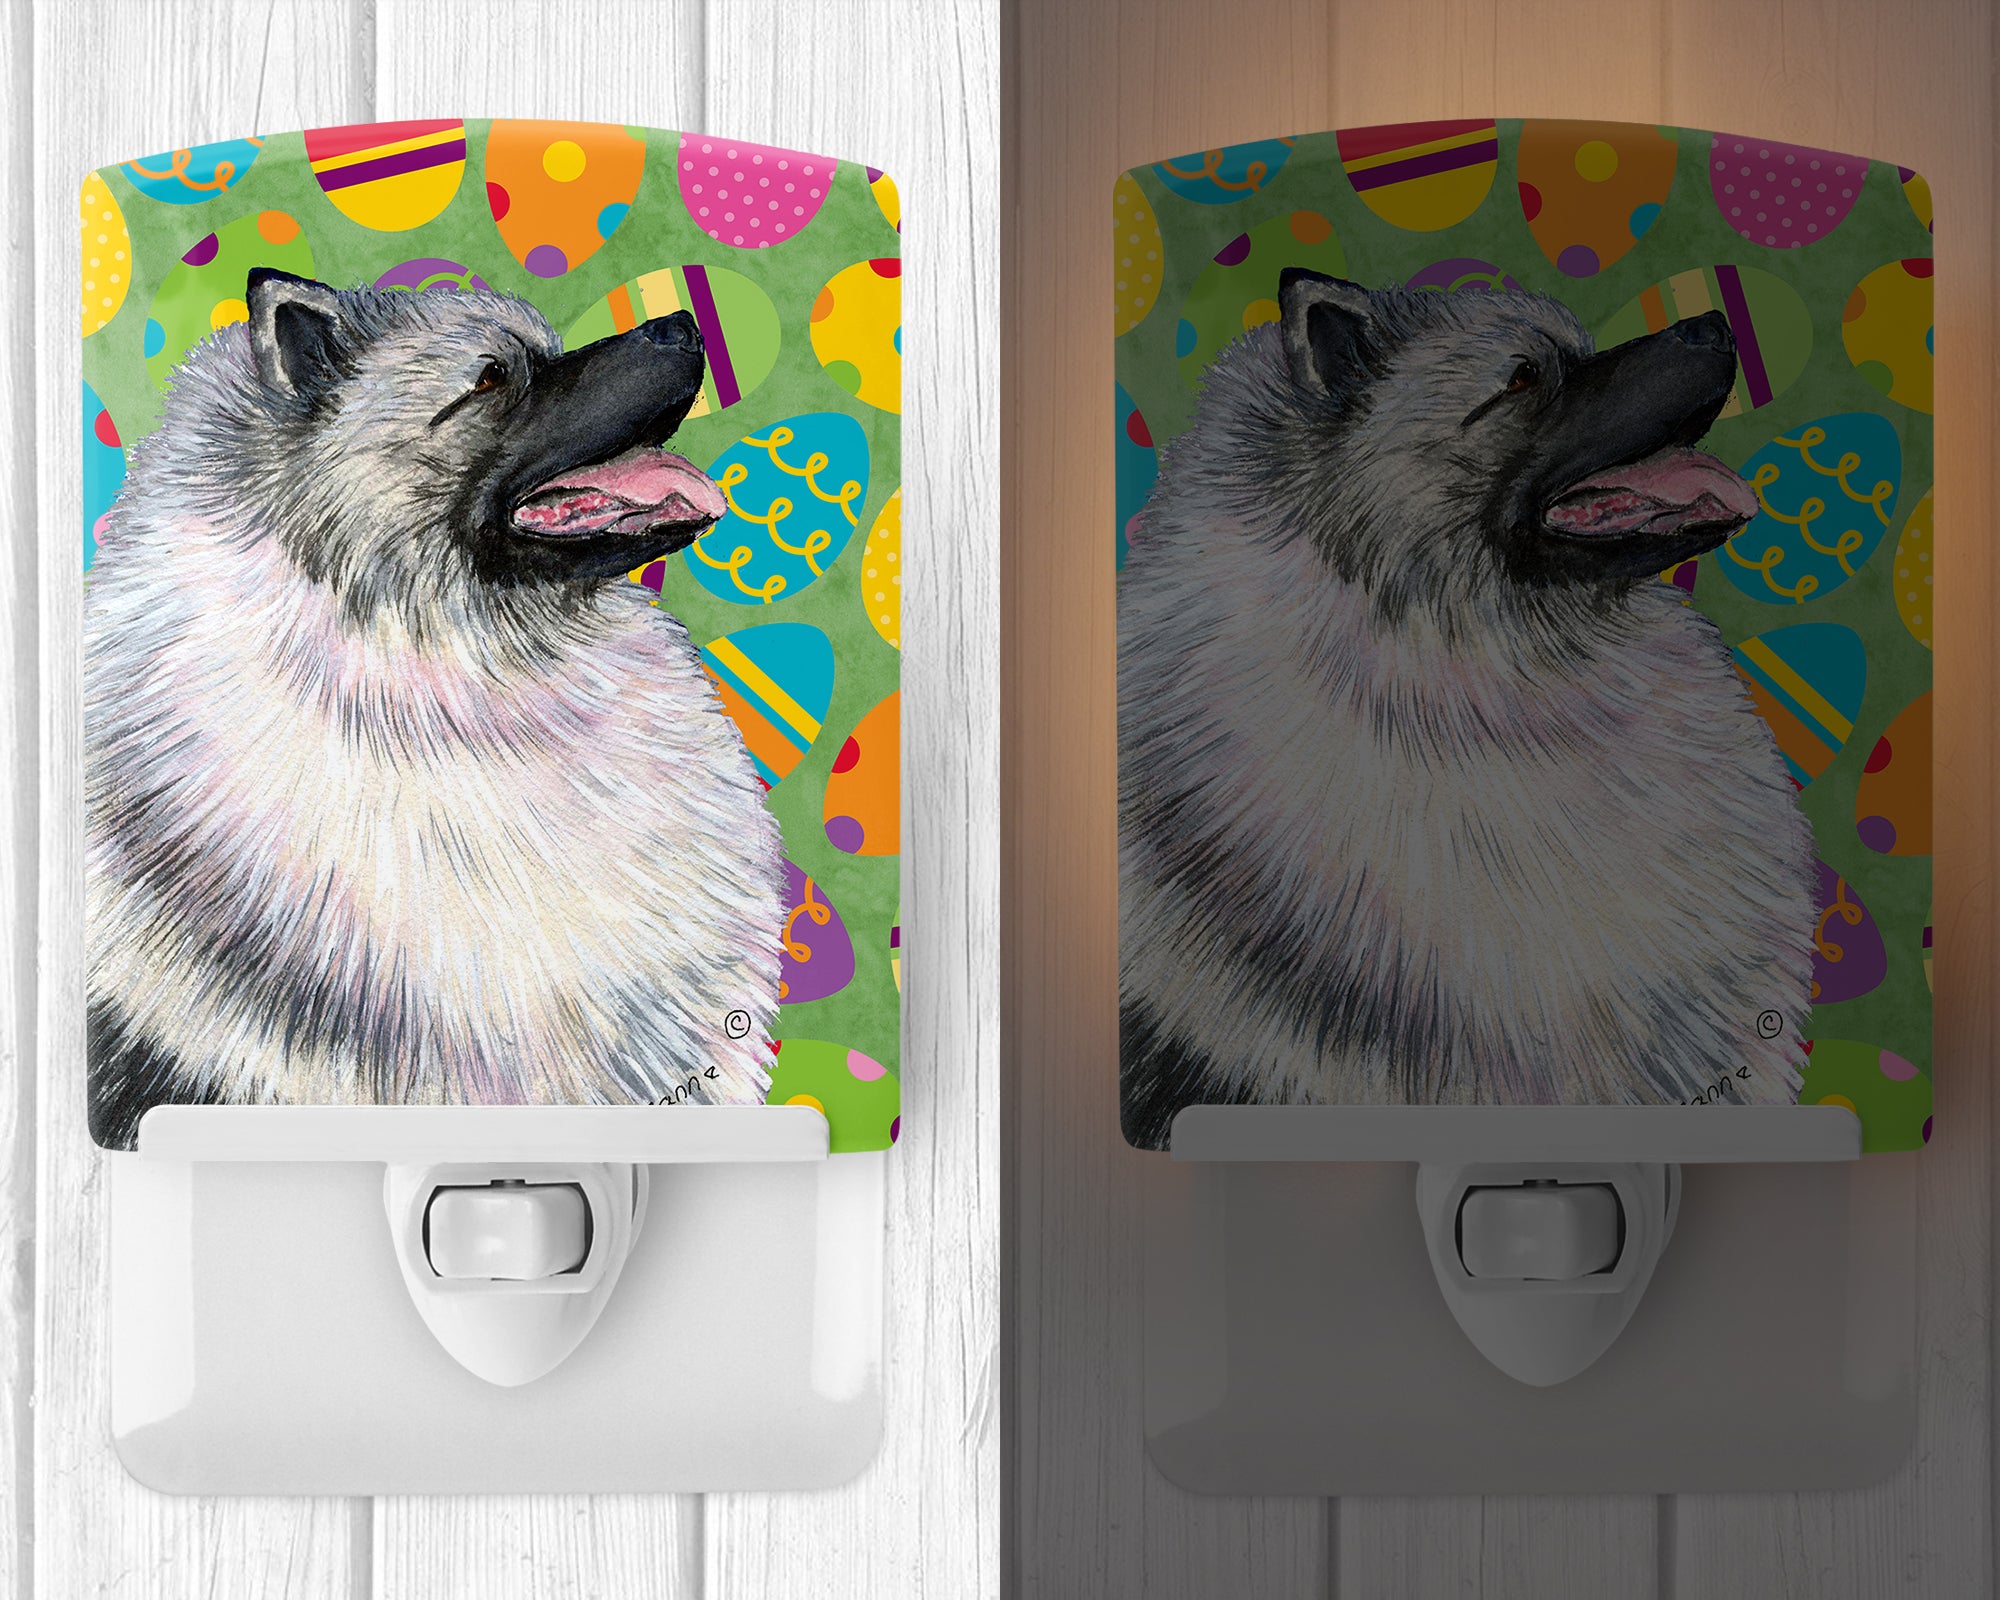 Keeshond Easter Eggtravaganza Ceramic Night Light SS4833CNL - the-store.com